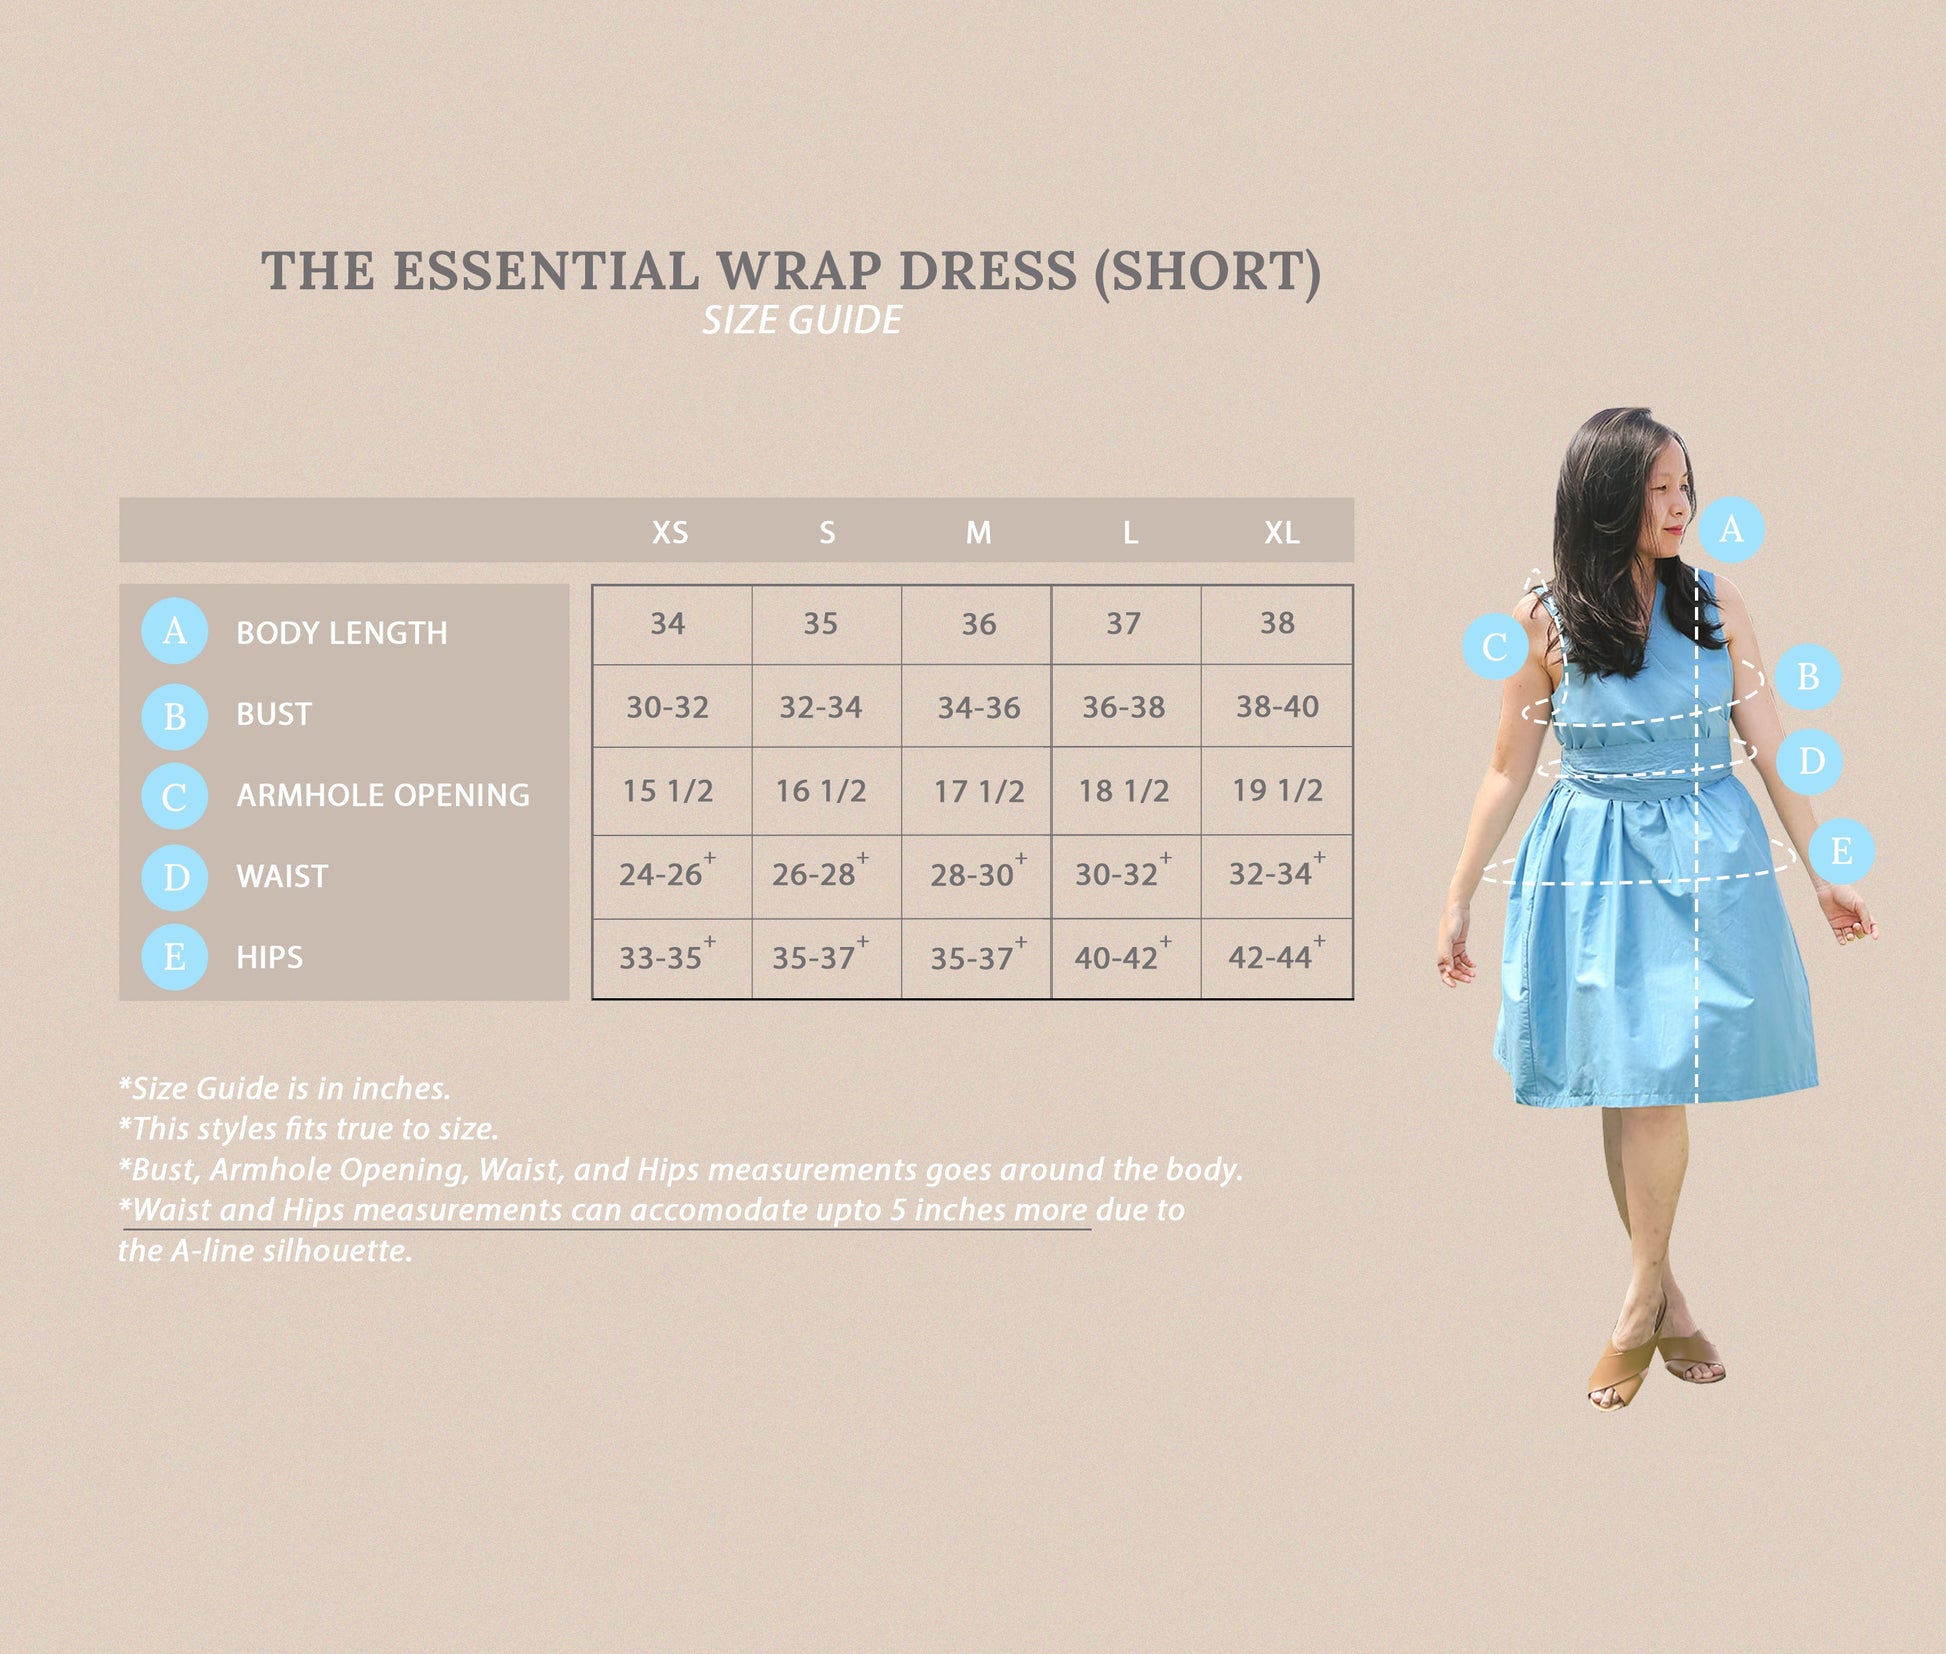 The Essential Wrap Dress (Short) Chambray Blue Fashion Rags2Riches